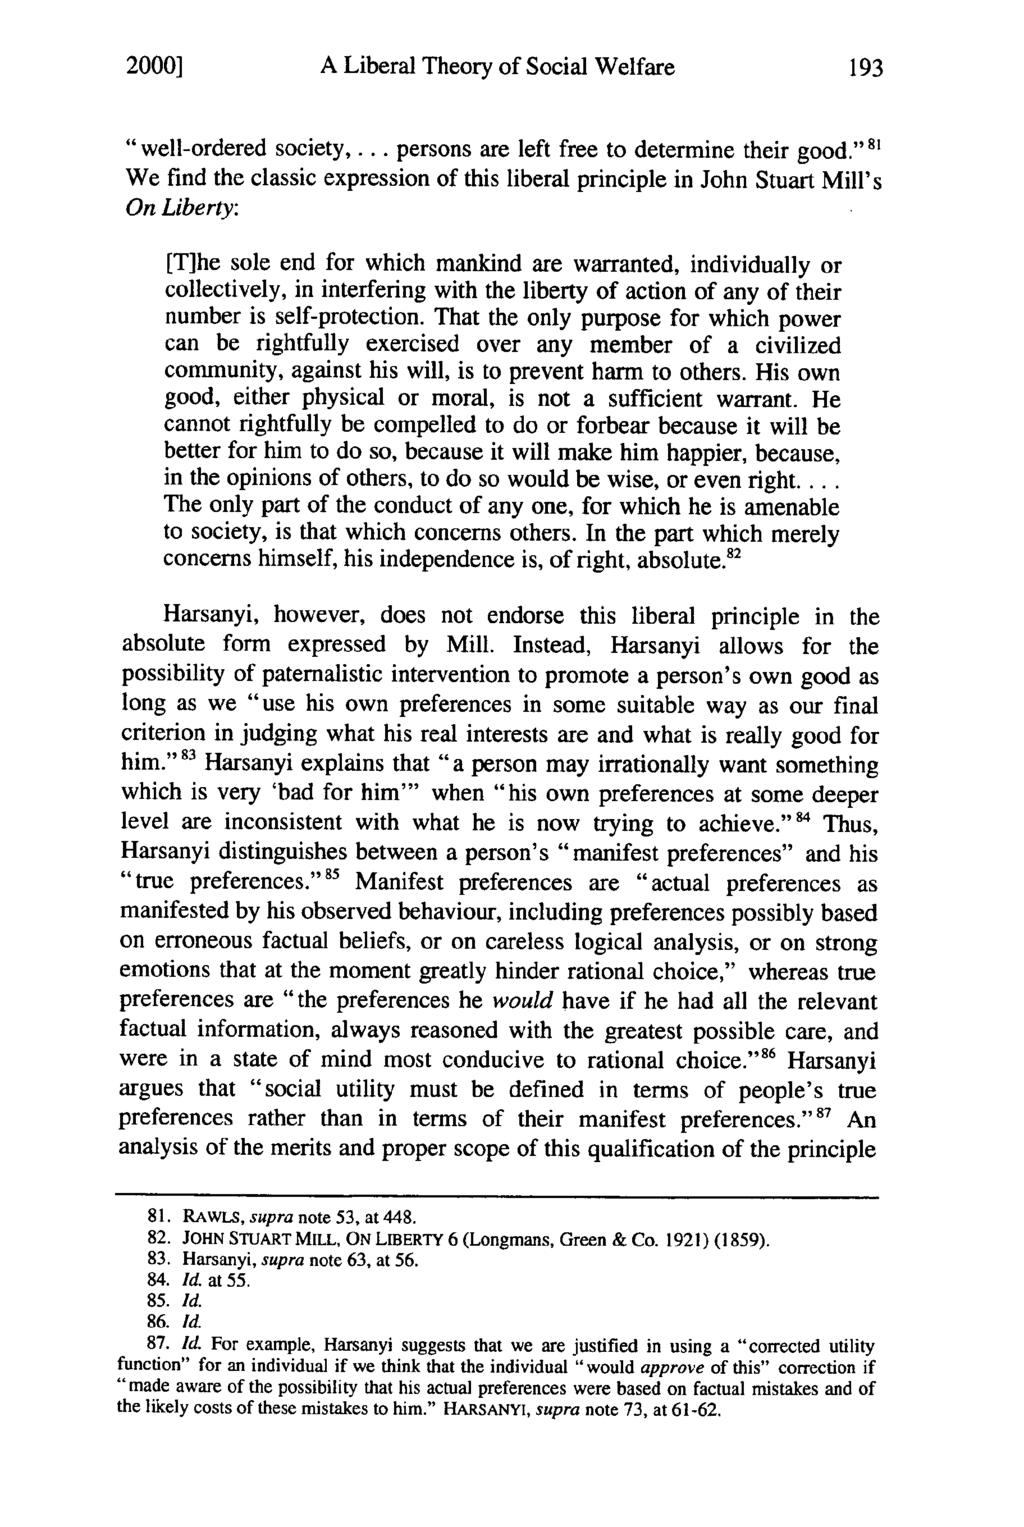 2000] A Liberal Theory of Social Welfare "well-ordered society,... persons are left free to determine their good.